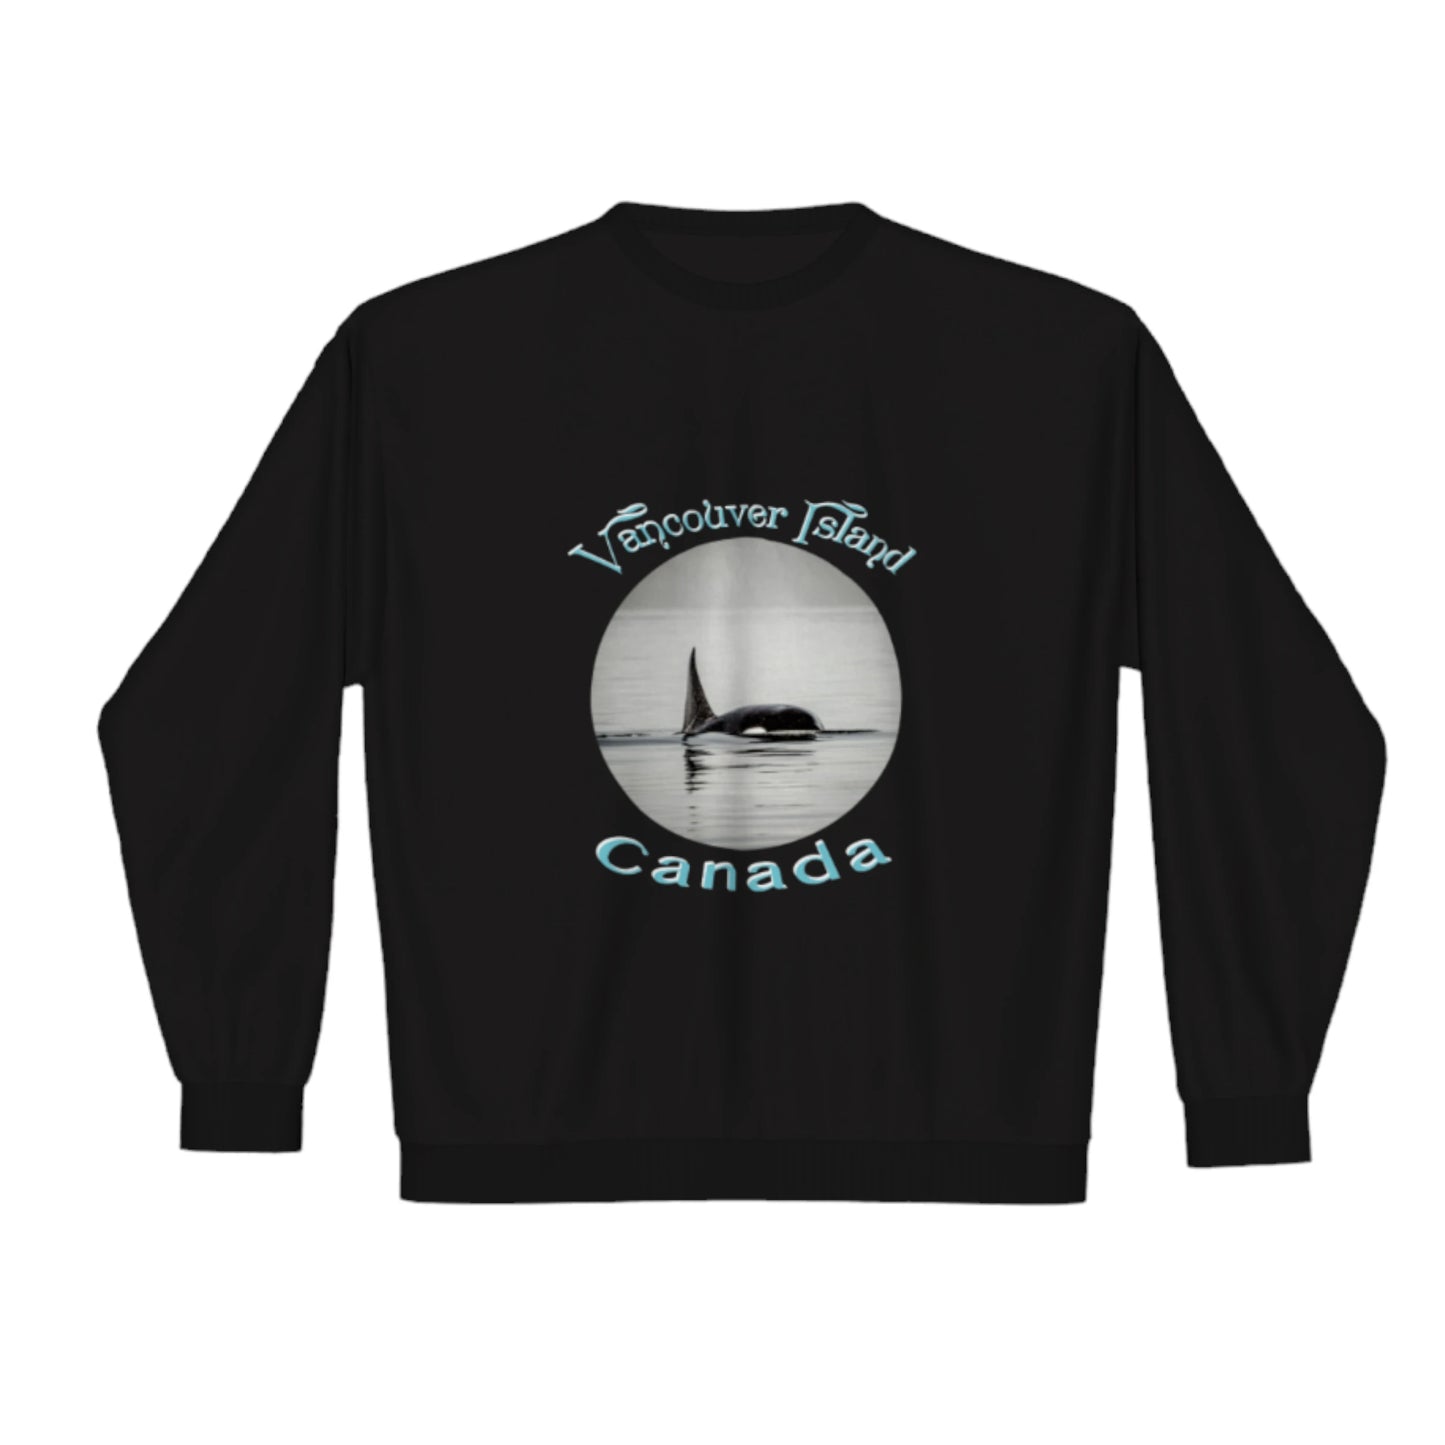 Orca Spray Vancouver Island Canada Premium Crewneck Sweatshirt. The image is of an orca exhaling while in the johnstone strait on Vancouver Island.  